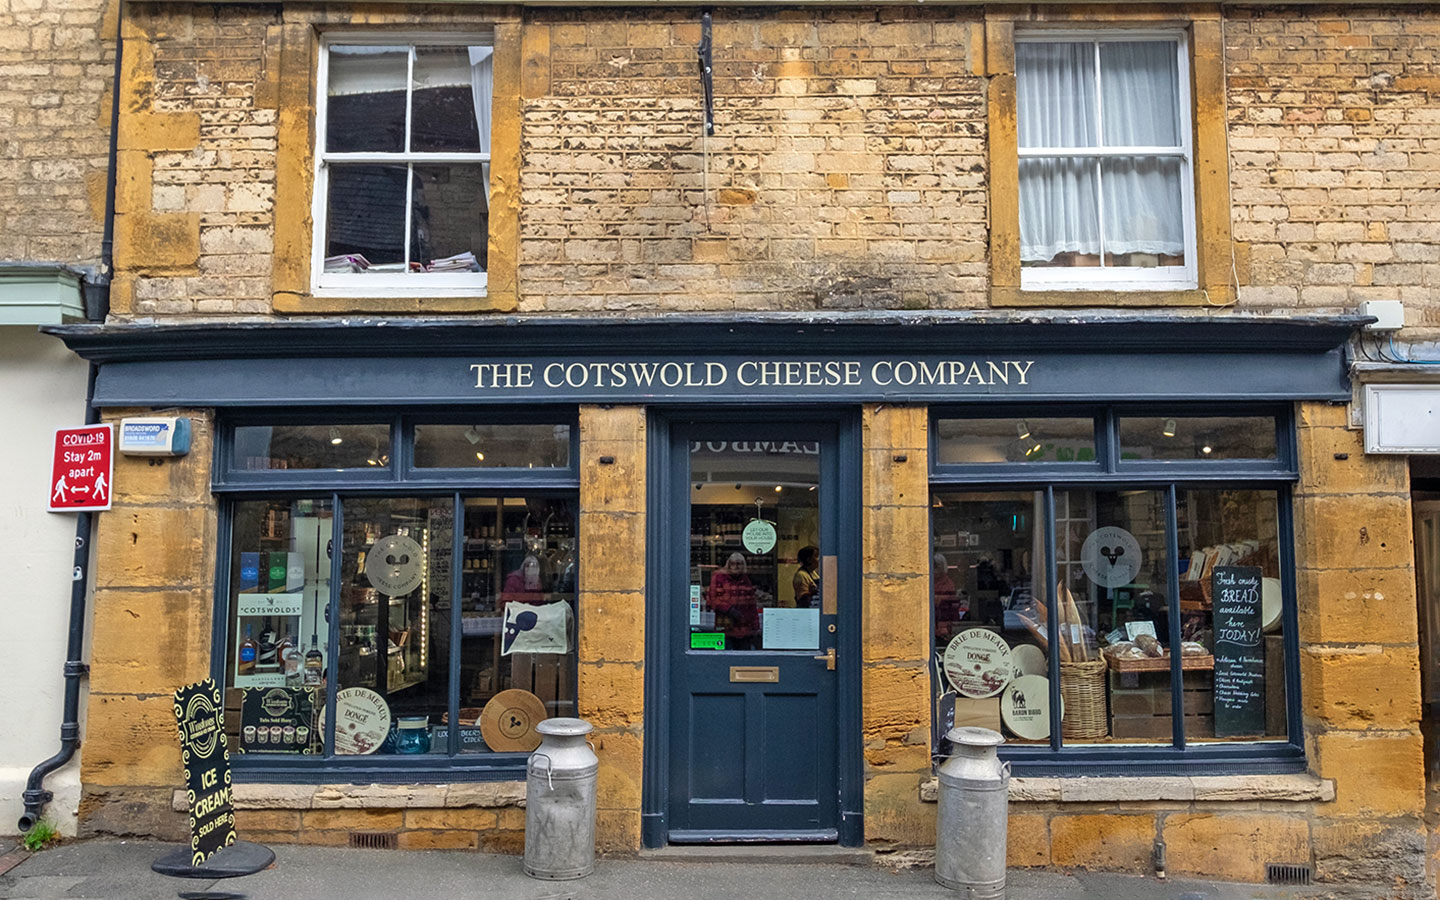 The Cotswold Cheese Company in Stow-on-the-Wold